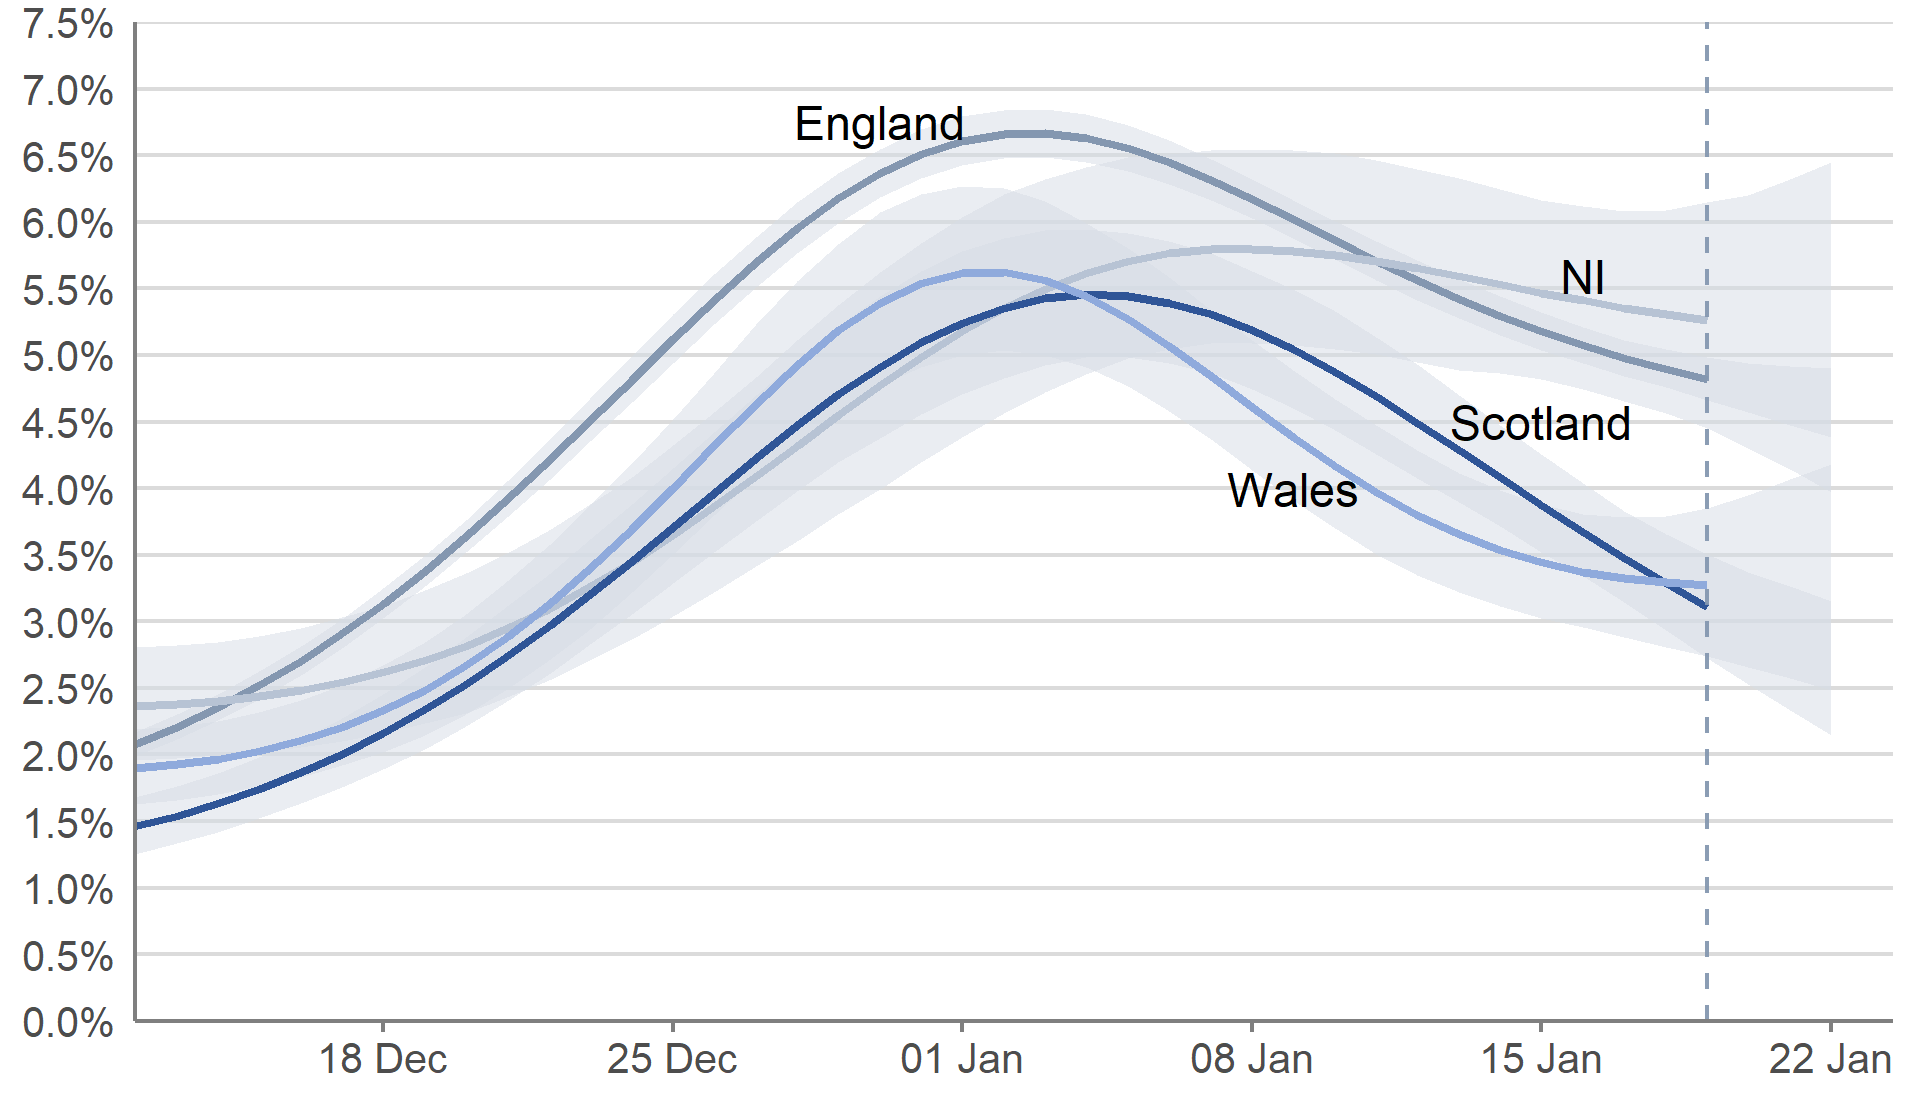 In England, Wales and Scotland, the estimated percentage of people testing positive for COVID-19 peaked in early January and is now decreasing. In Northern Ireland, the trend is uncertain in the most recent week. The positivity estimate for the week 16 to 22 January is highest for Northern Ireland, followed by England, Wales and then Scotland.